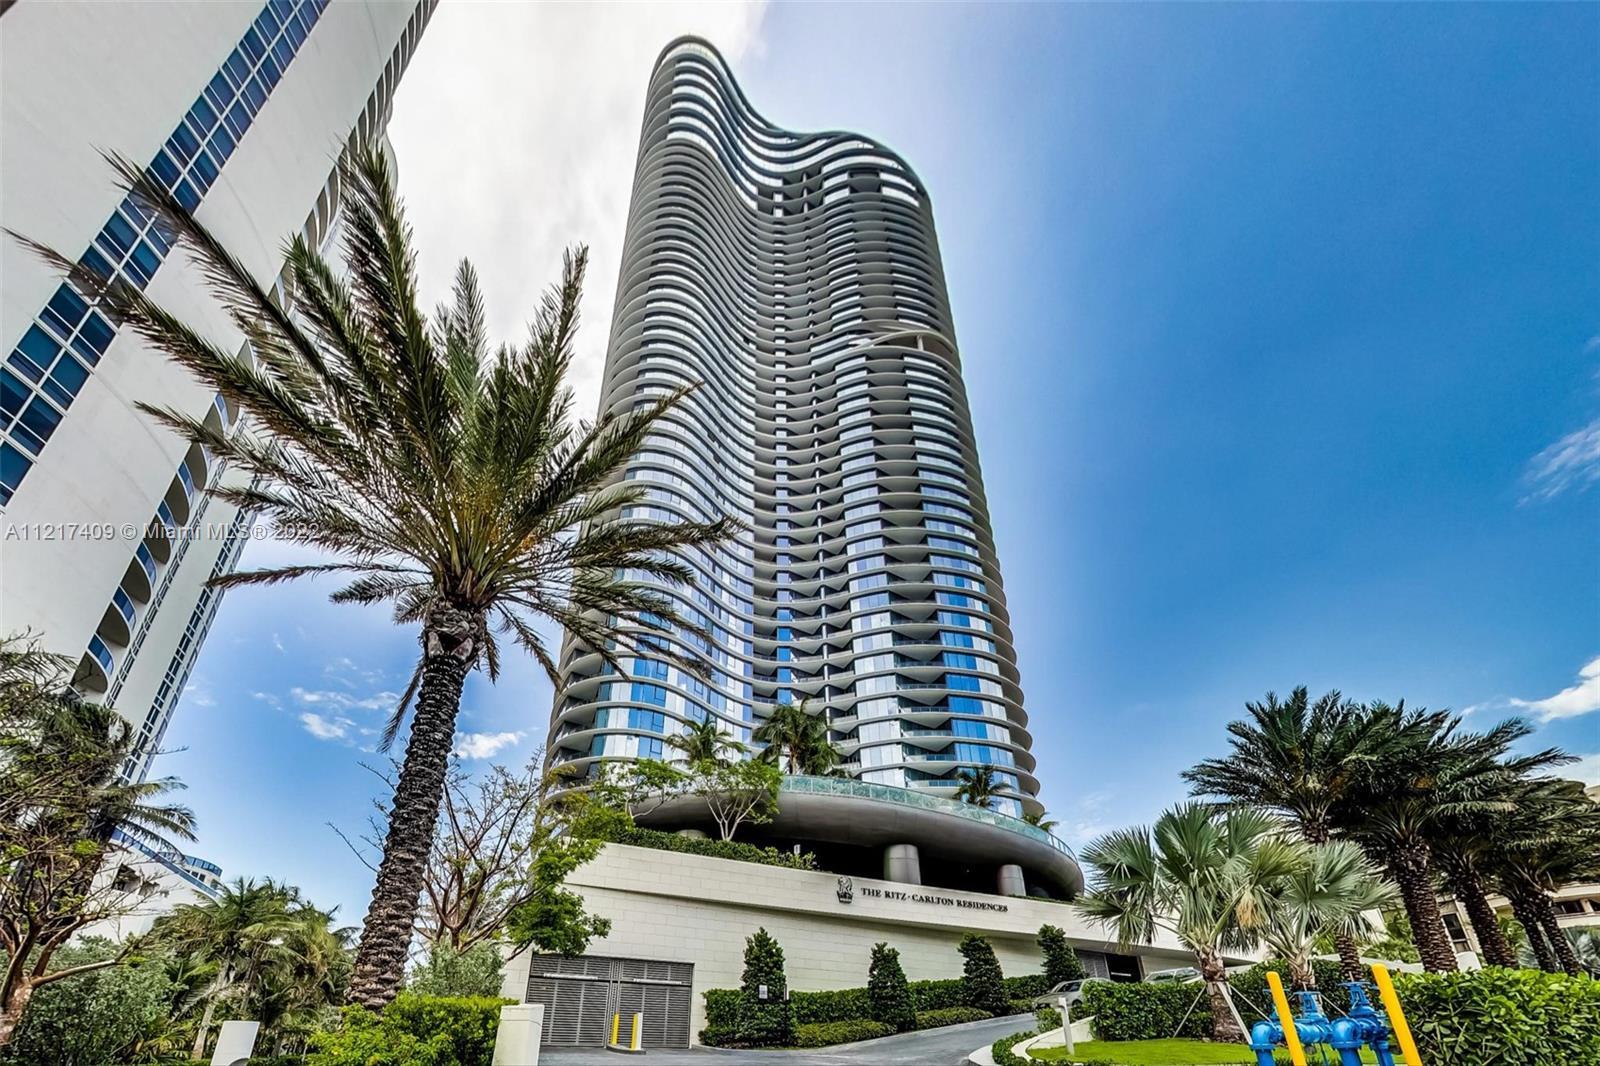 The 5-Star Ritz Carlton Residences in Sunny Isles, Fl brings you this 3/4.5 corner unit w Panoramic 